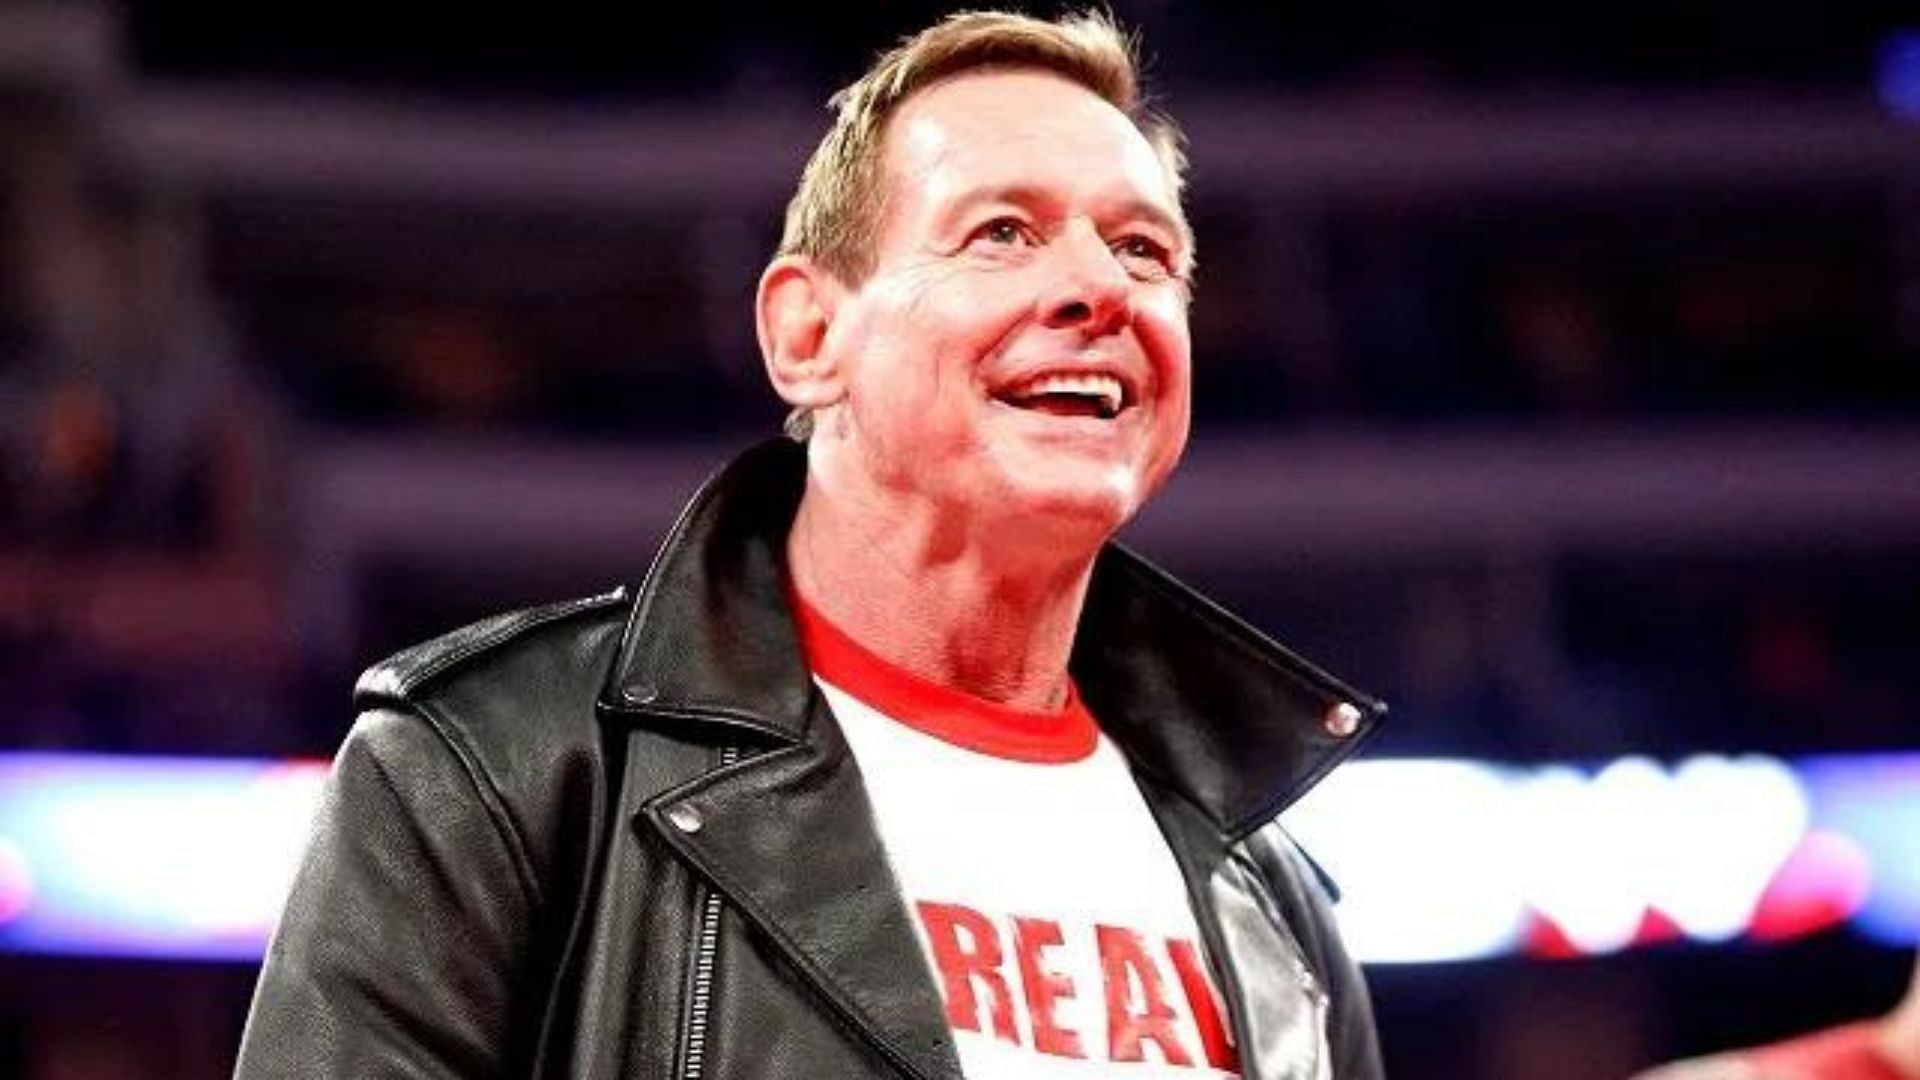 Roddy Piper received his WWE Hall of Fame induction in 2005